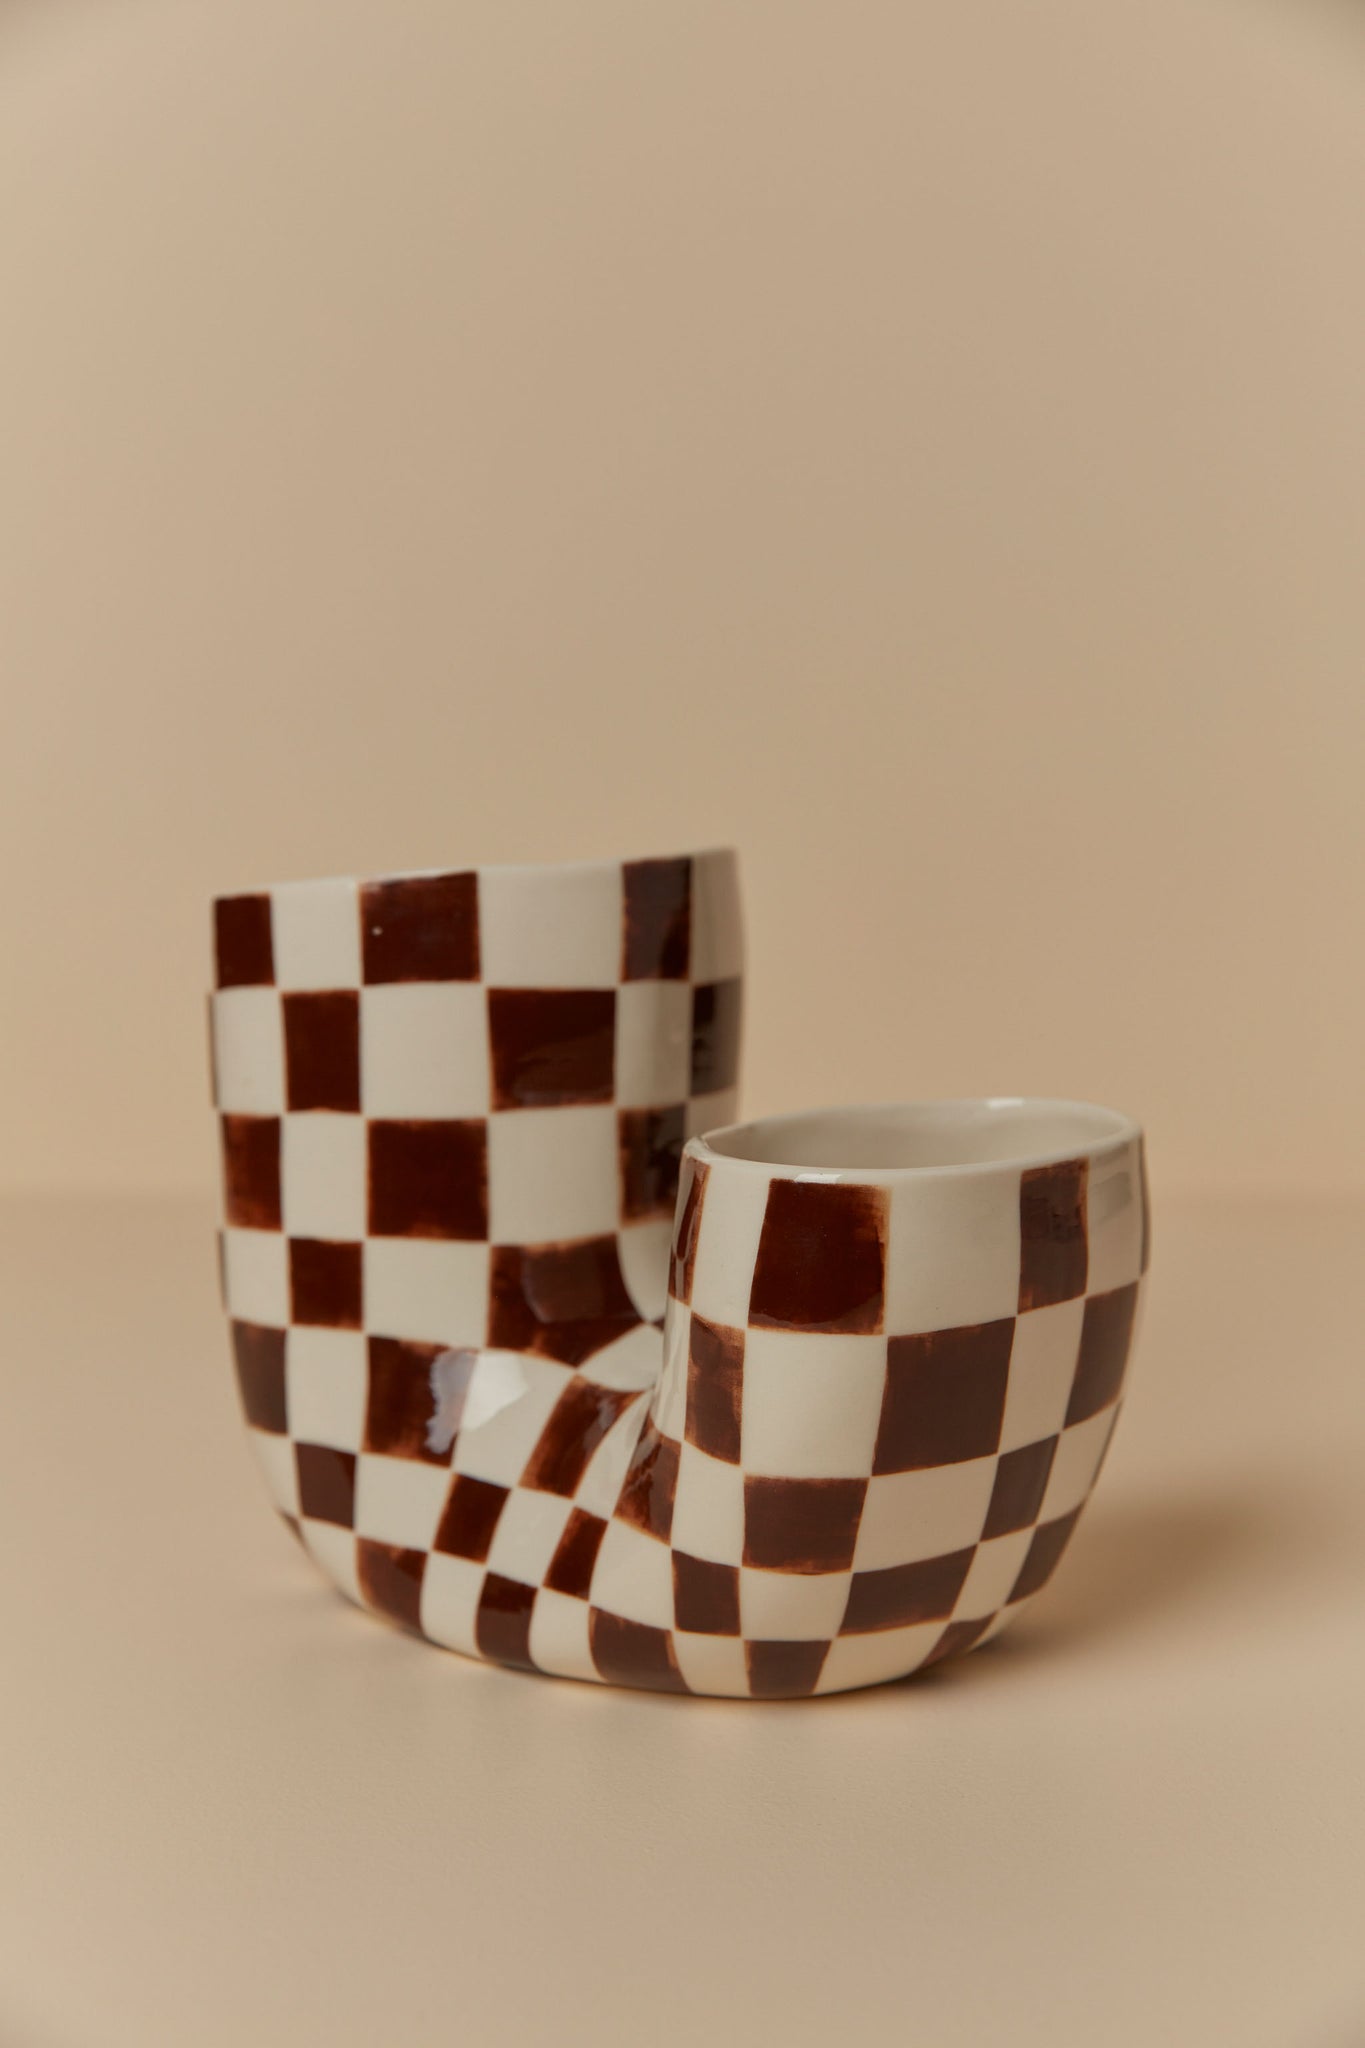 At The Table - Double Hole Vase, Chocolate Check